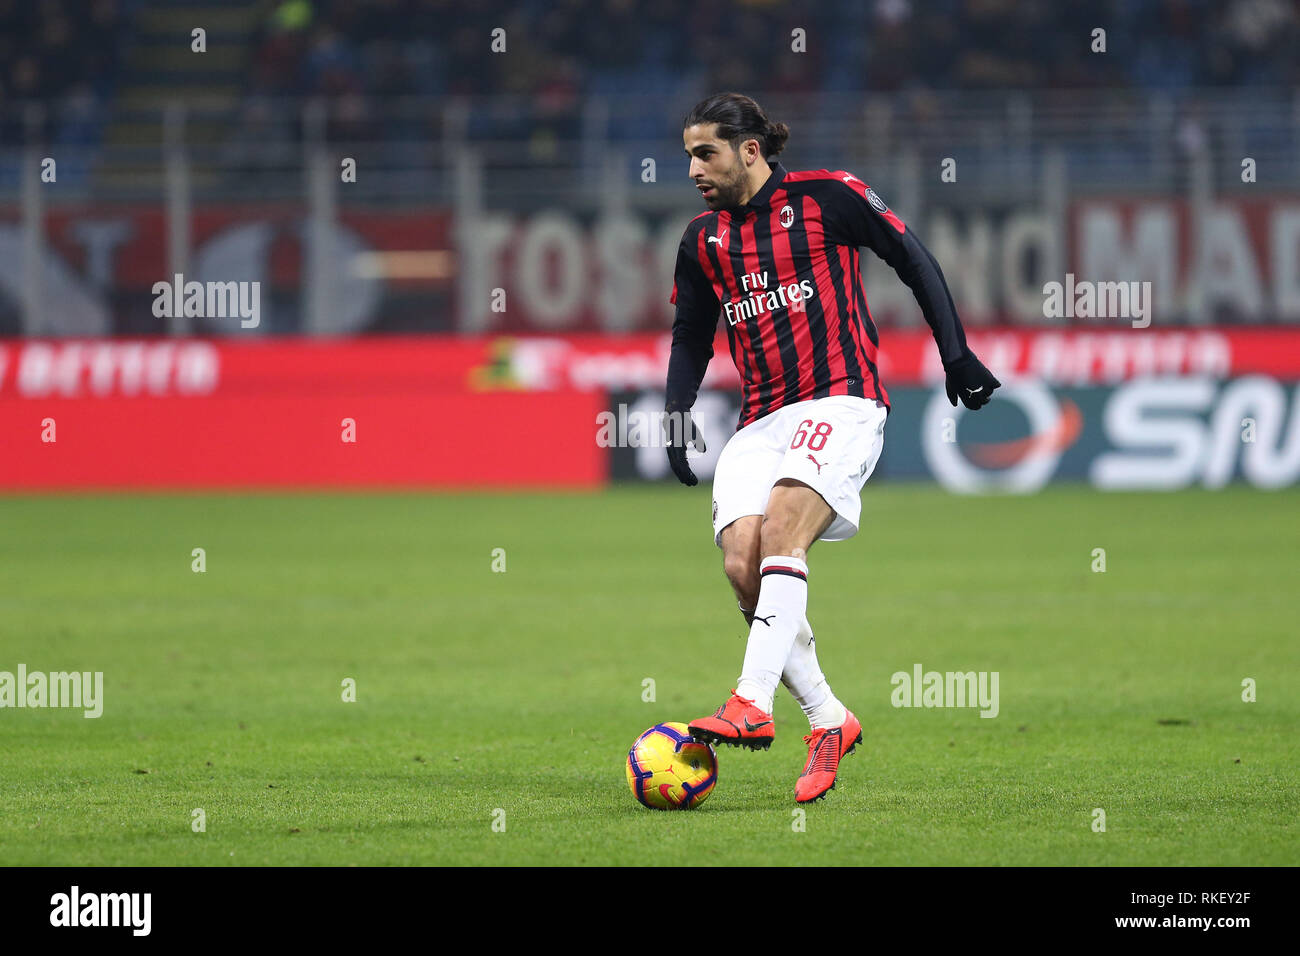 Milano, Italy. 10th February, 2019. Ricardo of Ac Milan in action during the Serie A football match between AC Milan Calcio. Credit: Marco Canoniero/Alamy Live News Stock Photo -